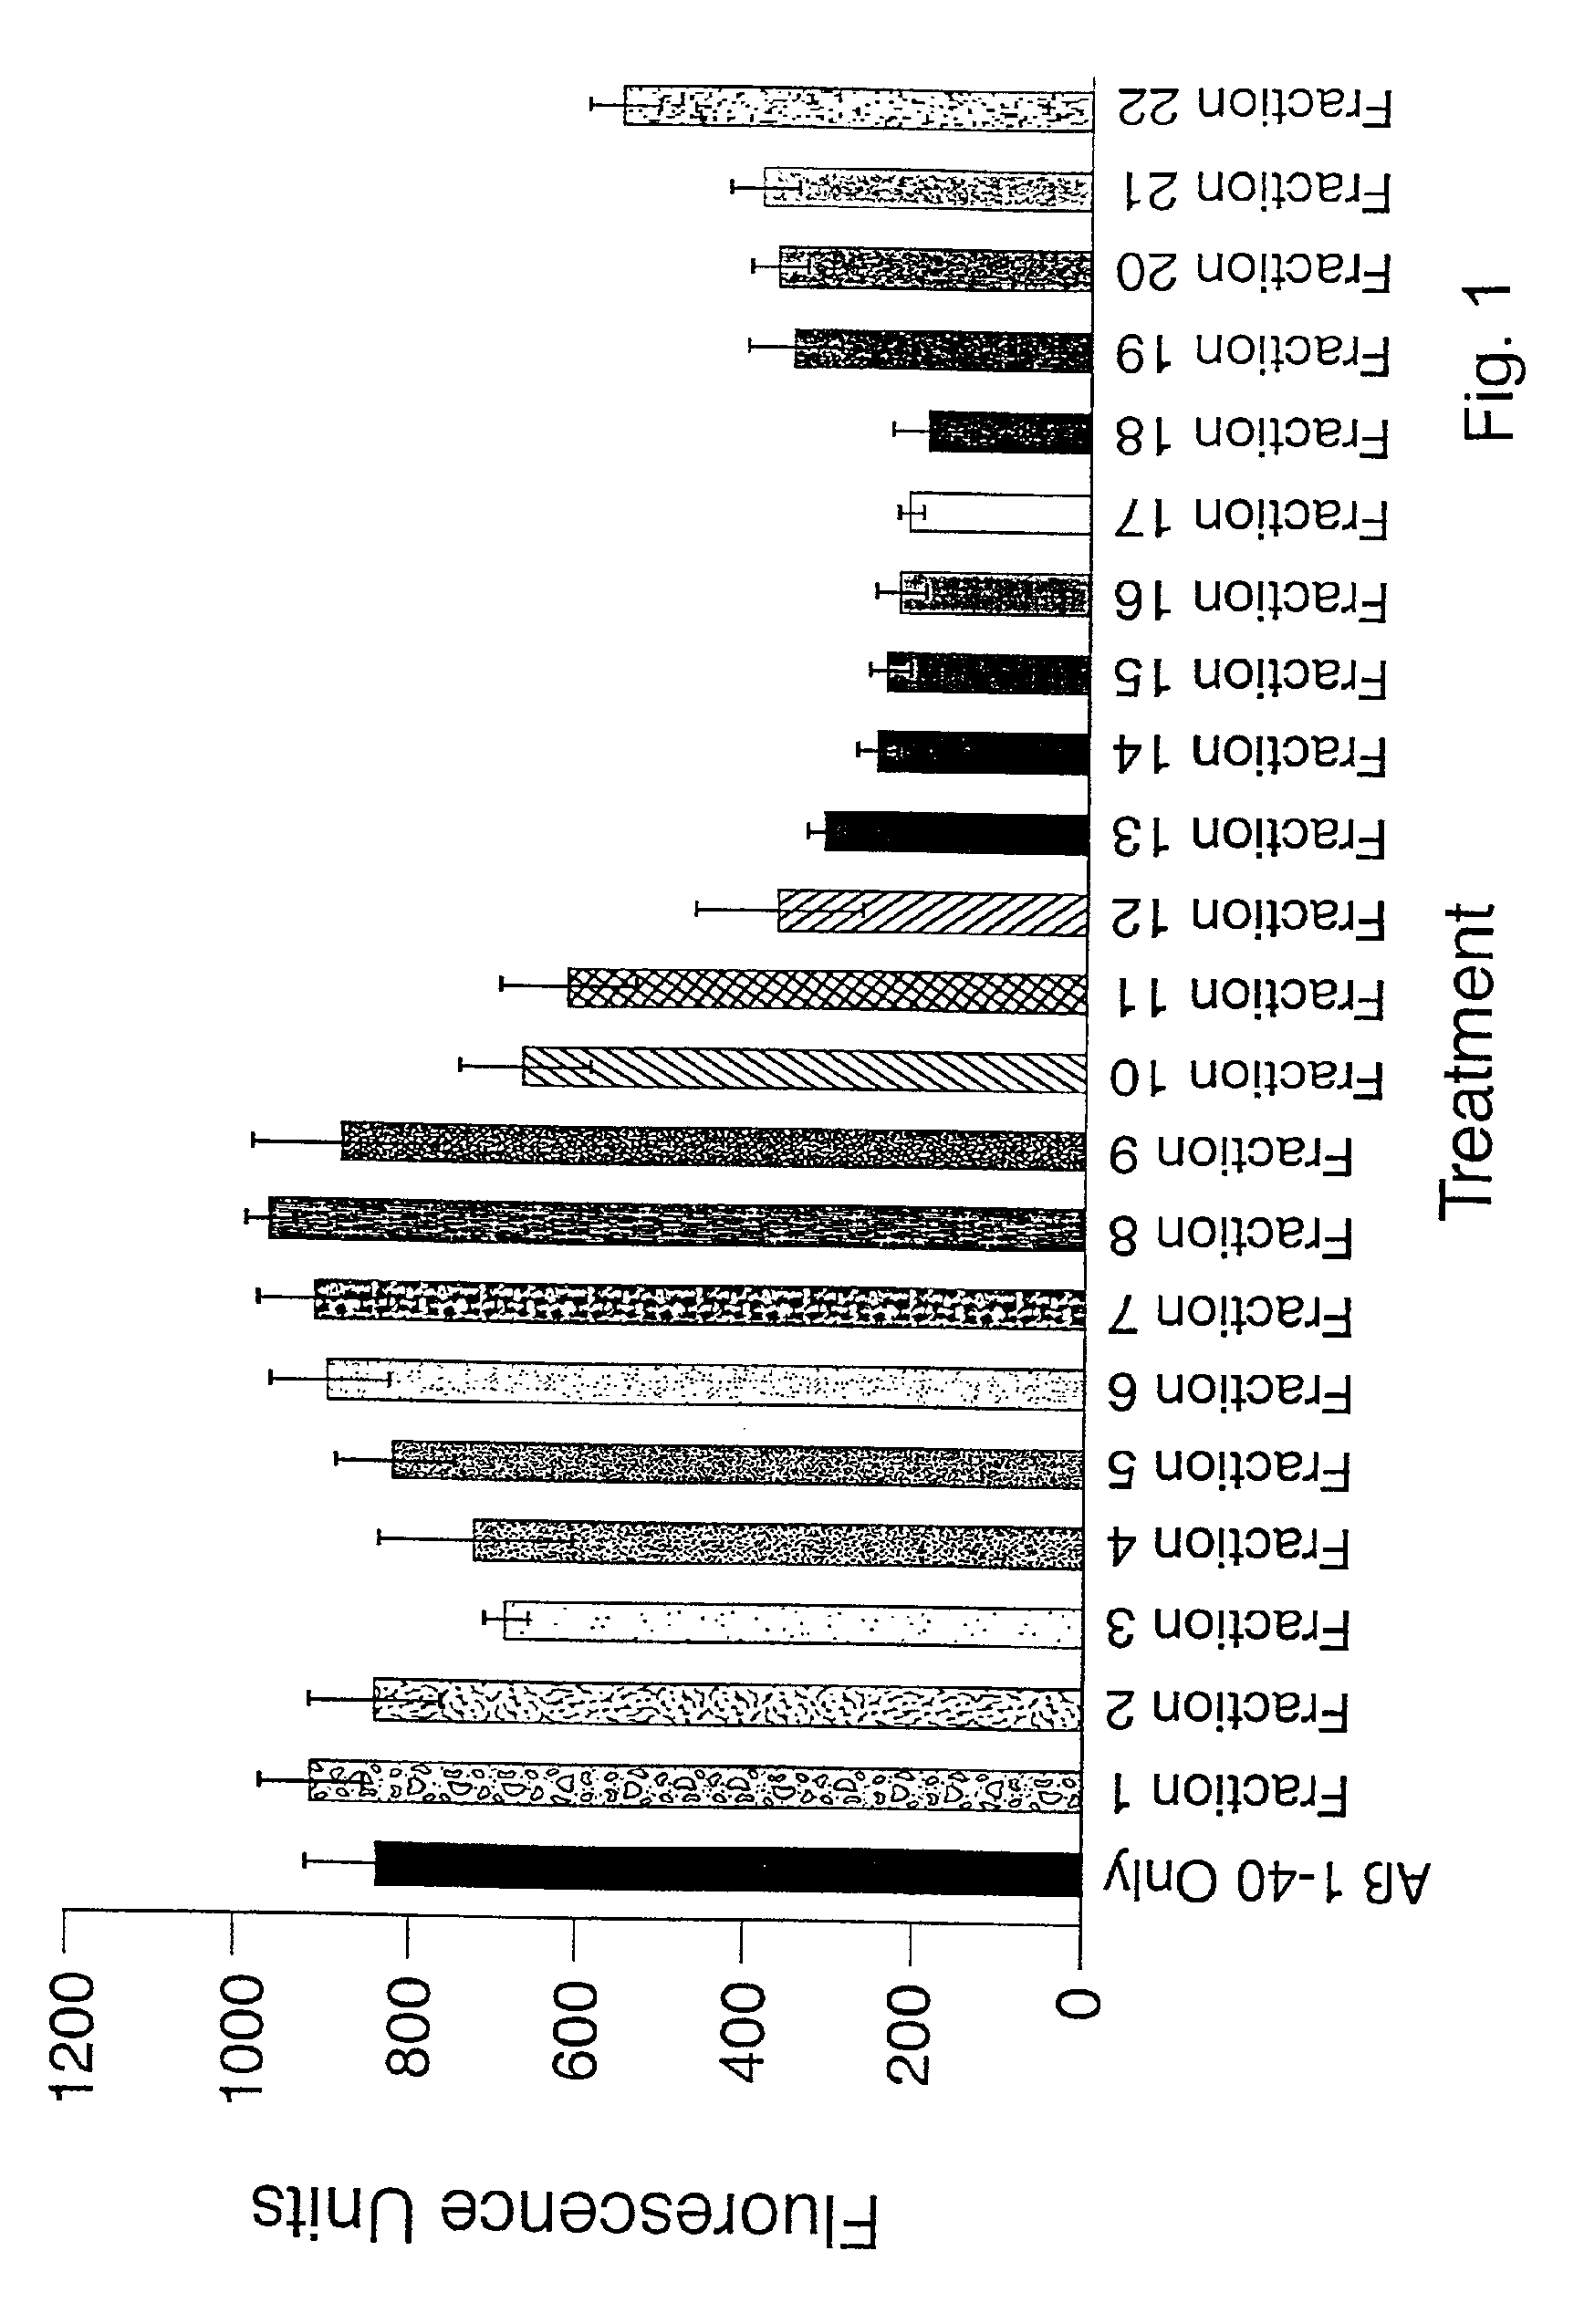 Methods of isolating amyloid-inhibiting compounds and use of compounds isolated from Uncaria tomentosa and related plants